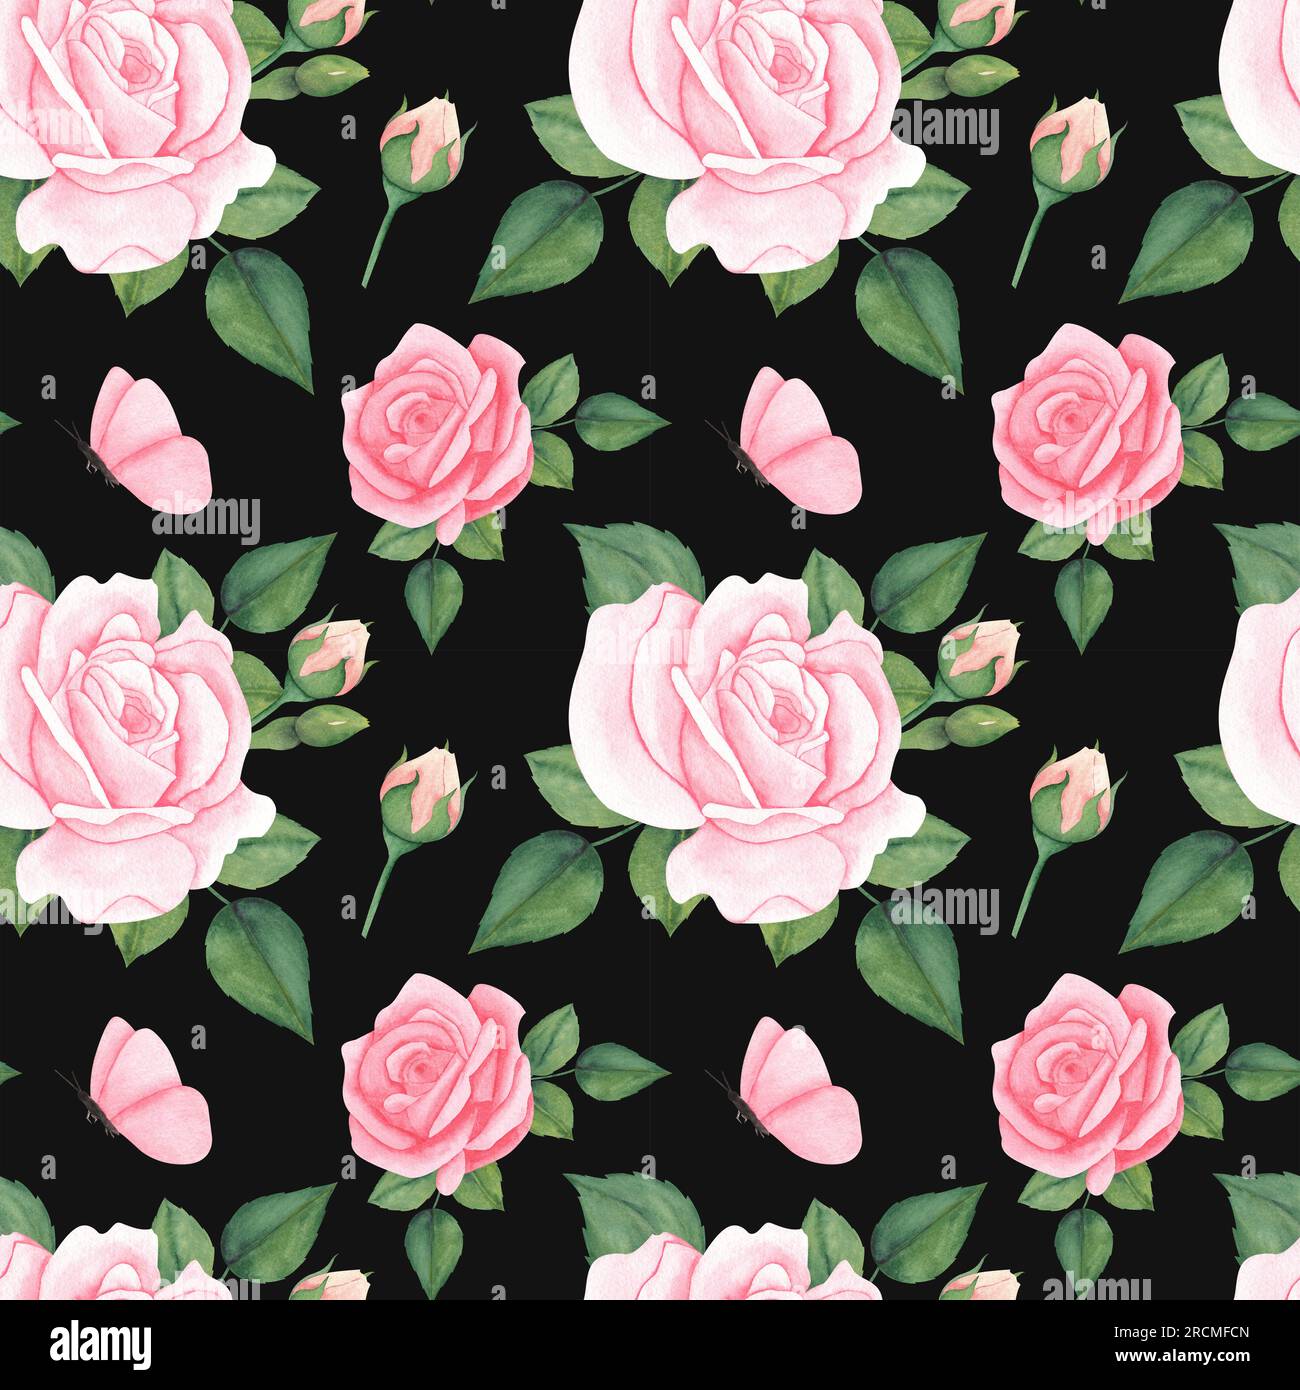 Watercolor seamless pattern with pink peach pastel roses on black background. illustration for print, textile, fabric, wrapping paper. Stock Photo